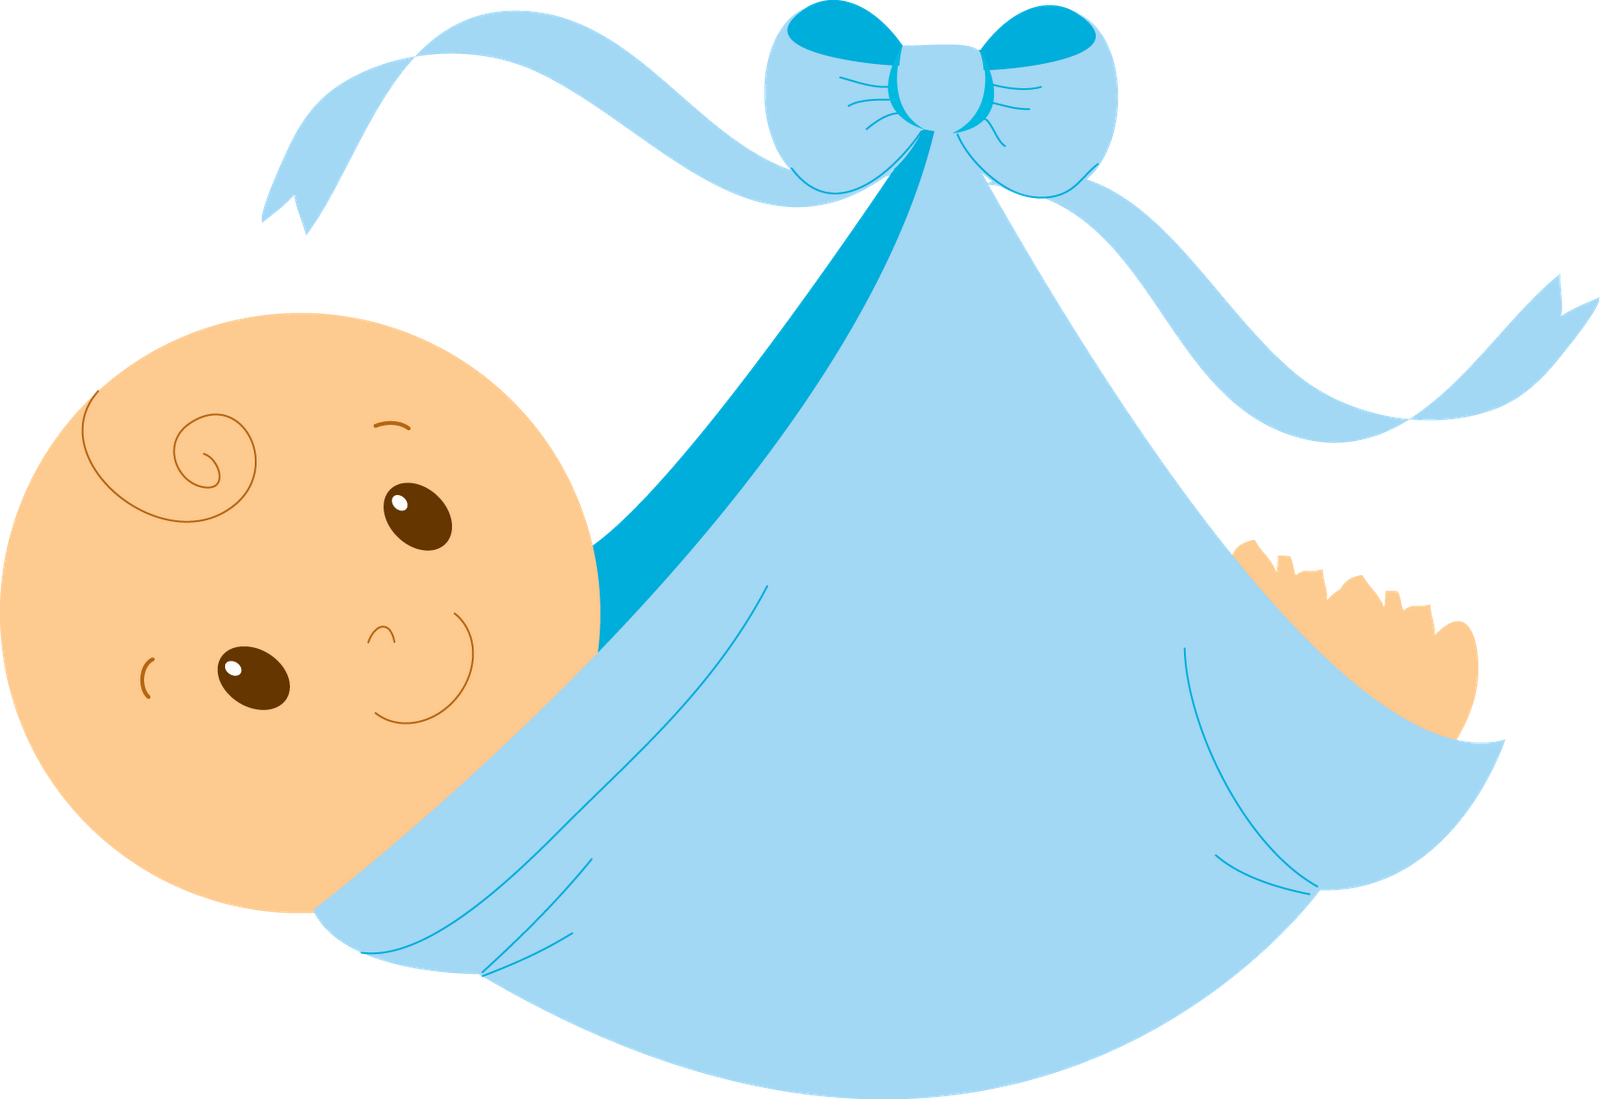 Baby Dress Clipart